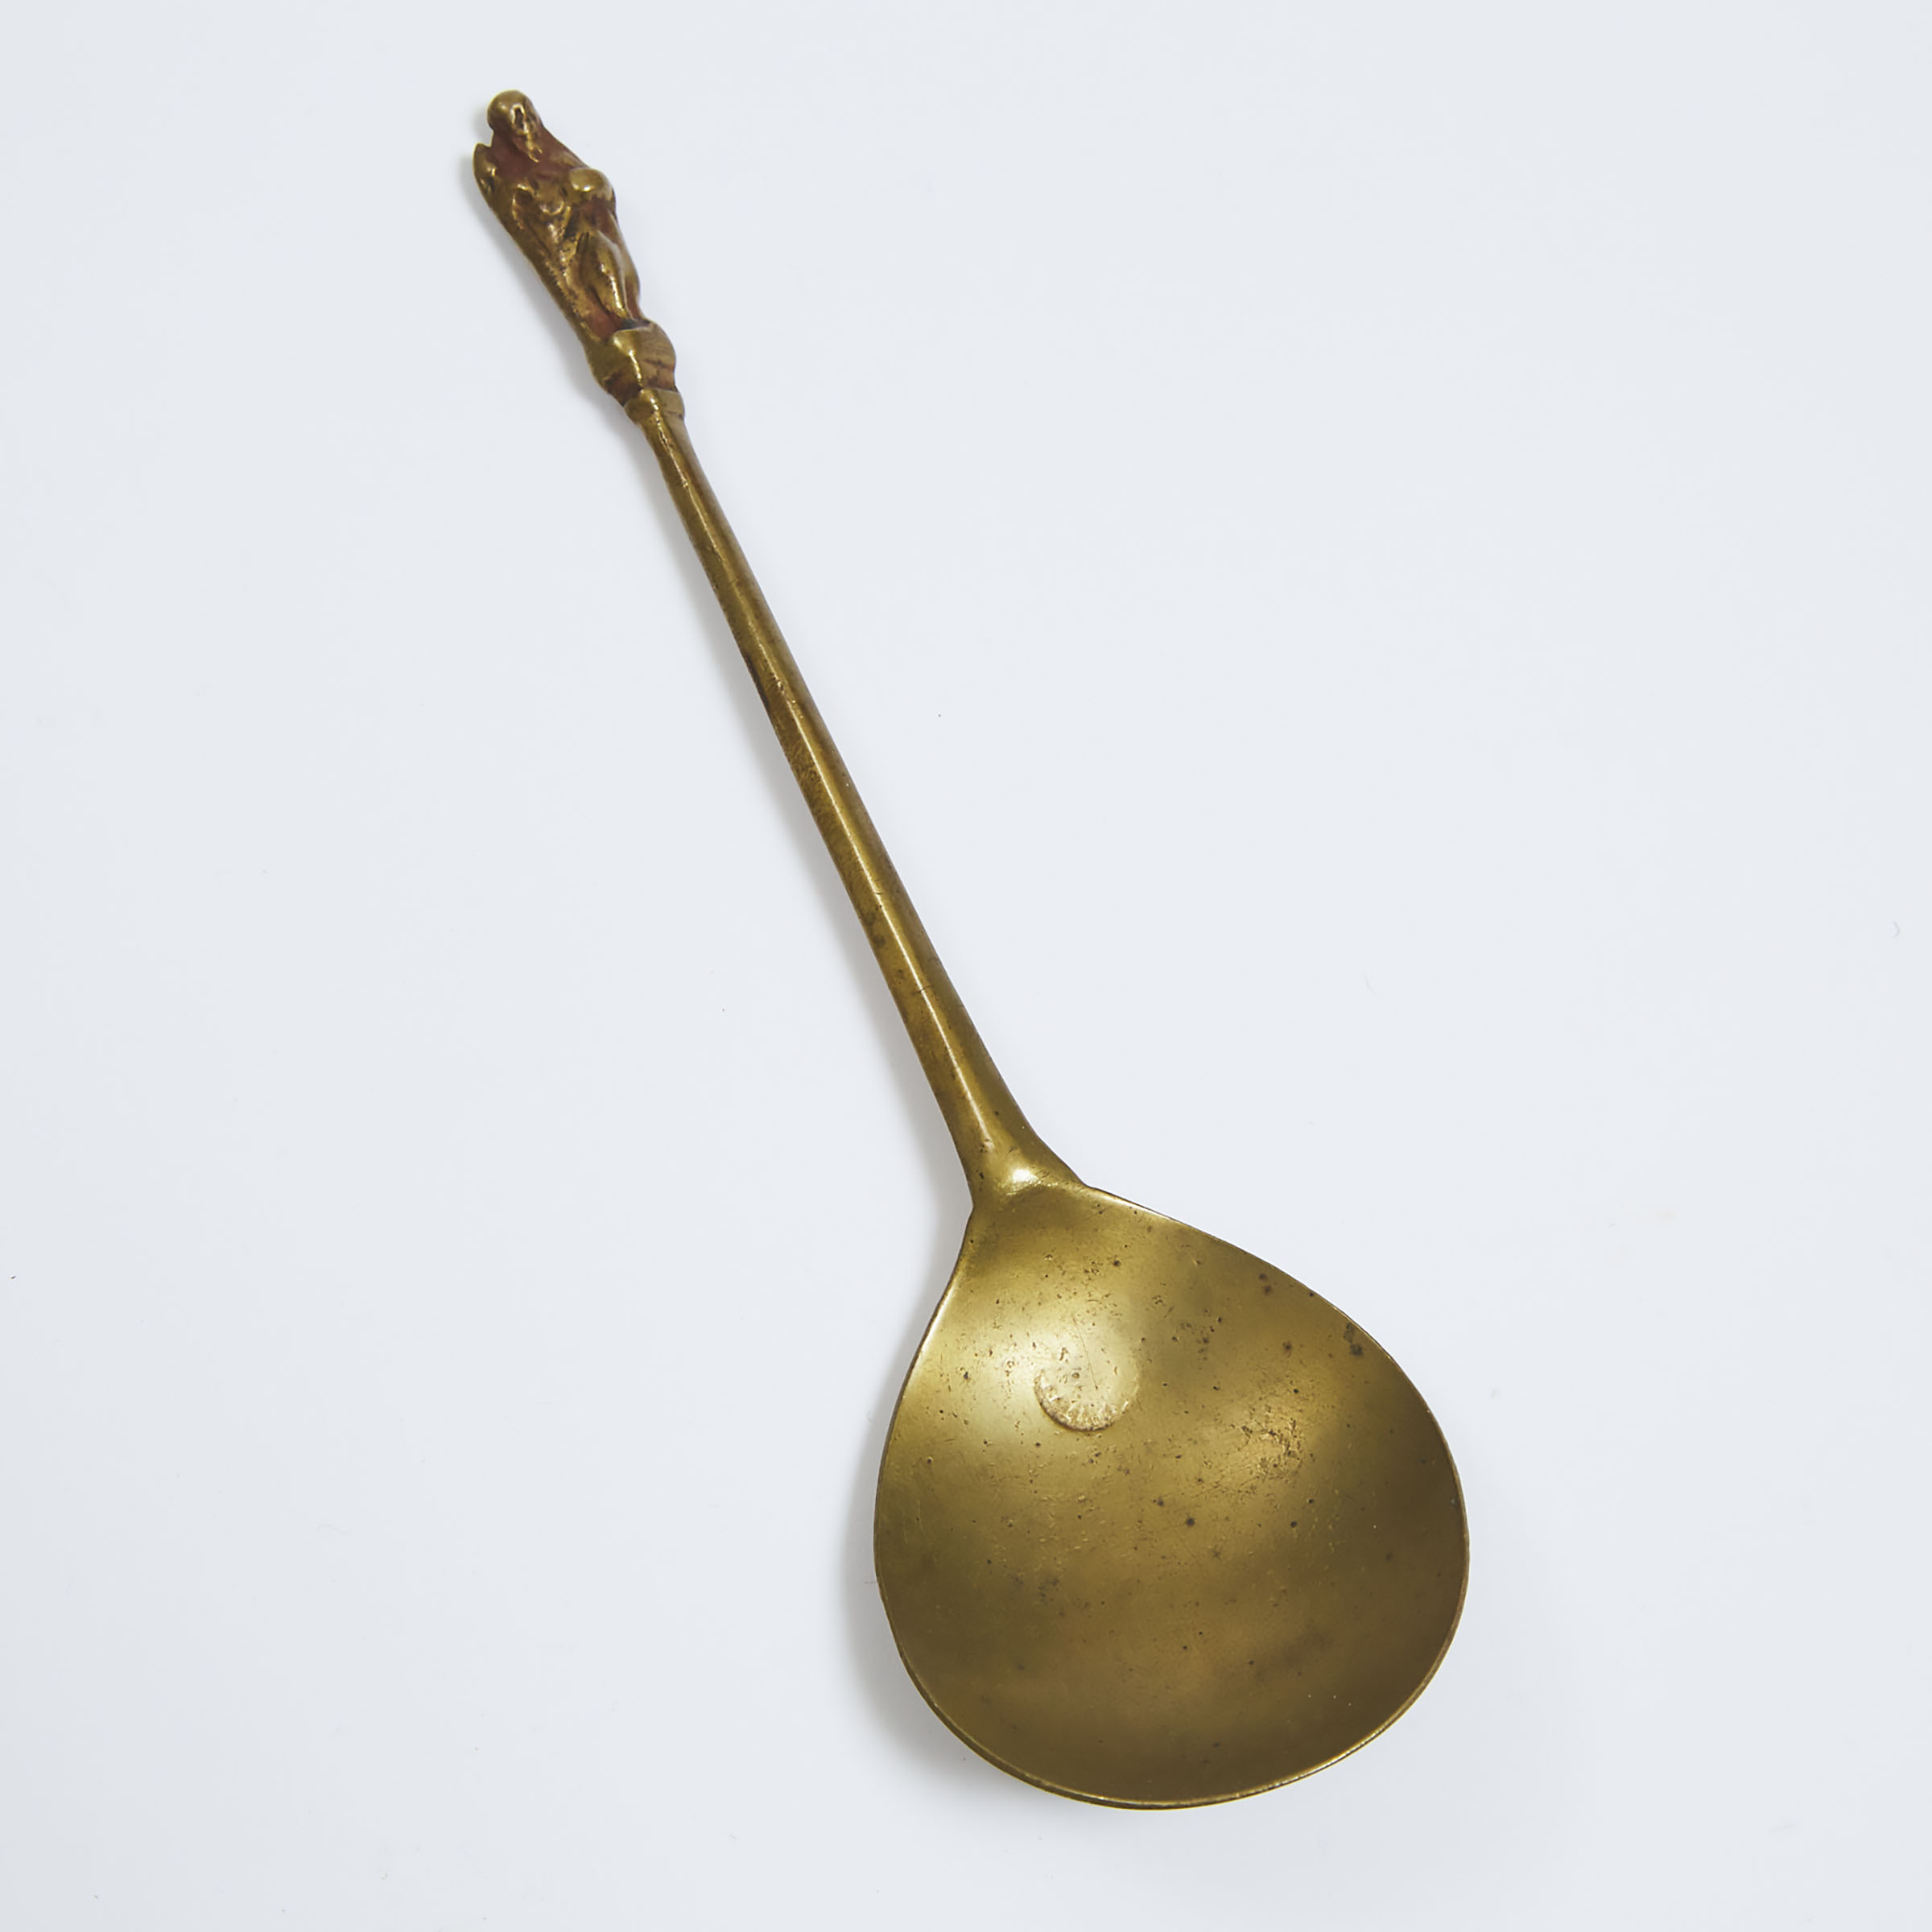 English Latten Apostle Spoon of St. James the Greater, early 17th century